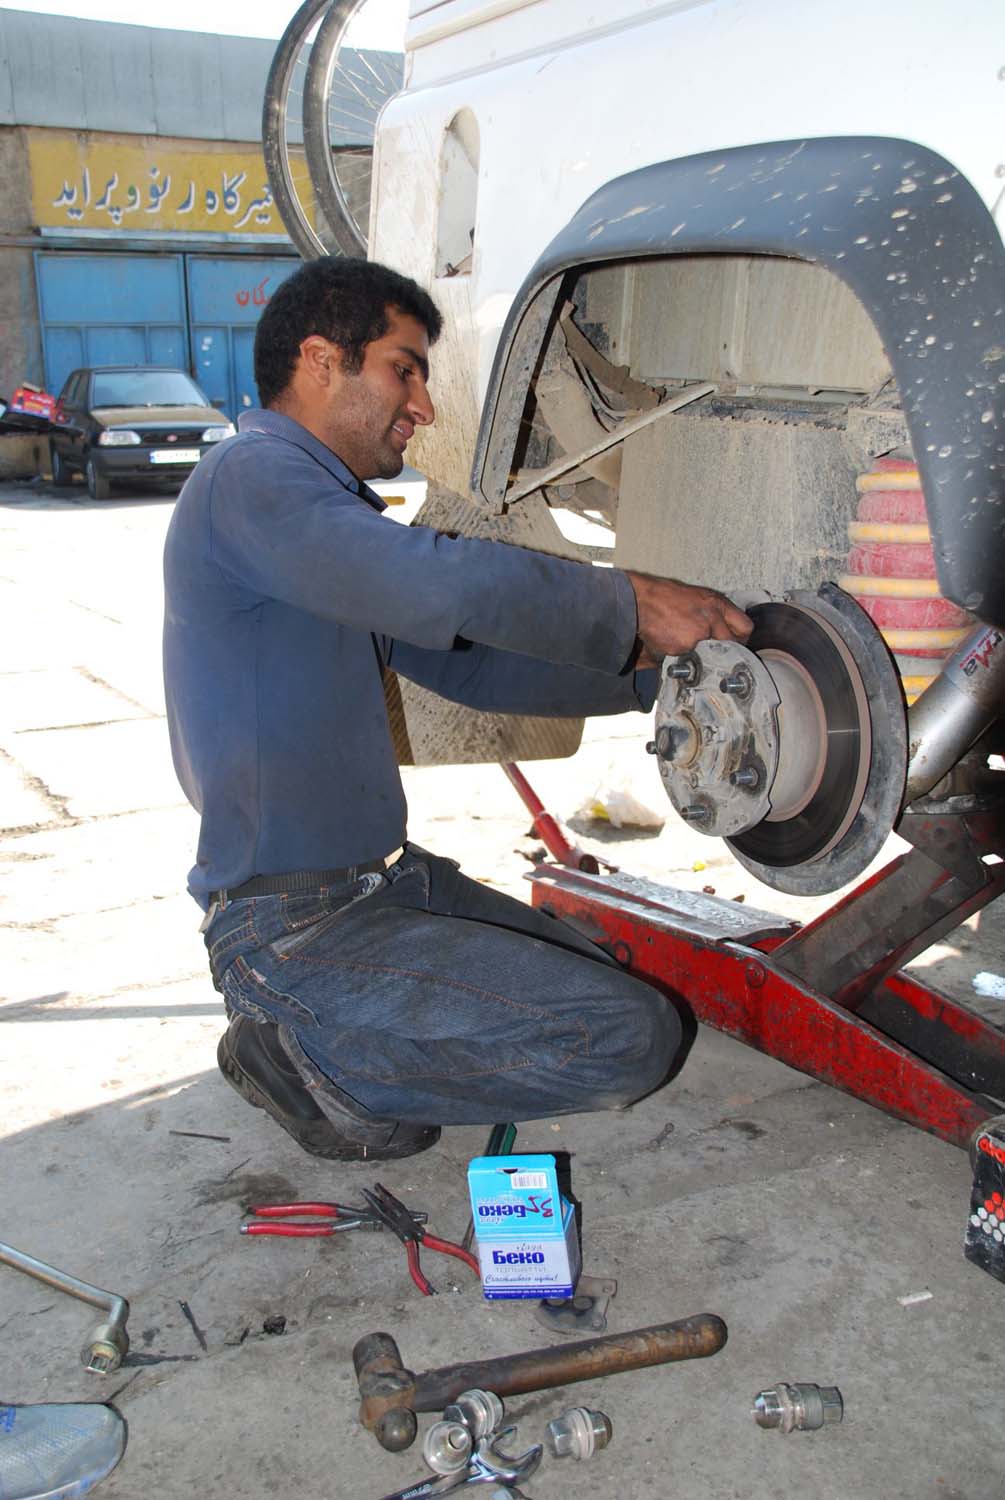 replacing the rear brakes with new Lada brakes from Tajikistan